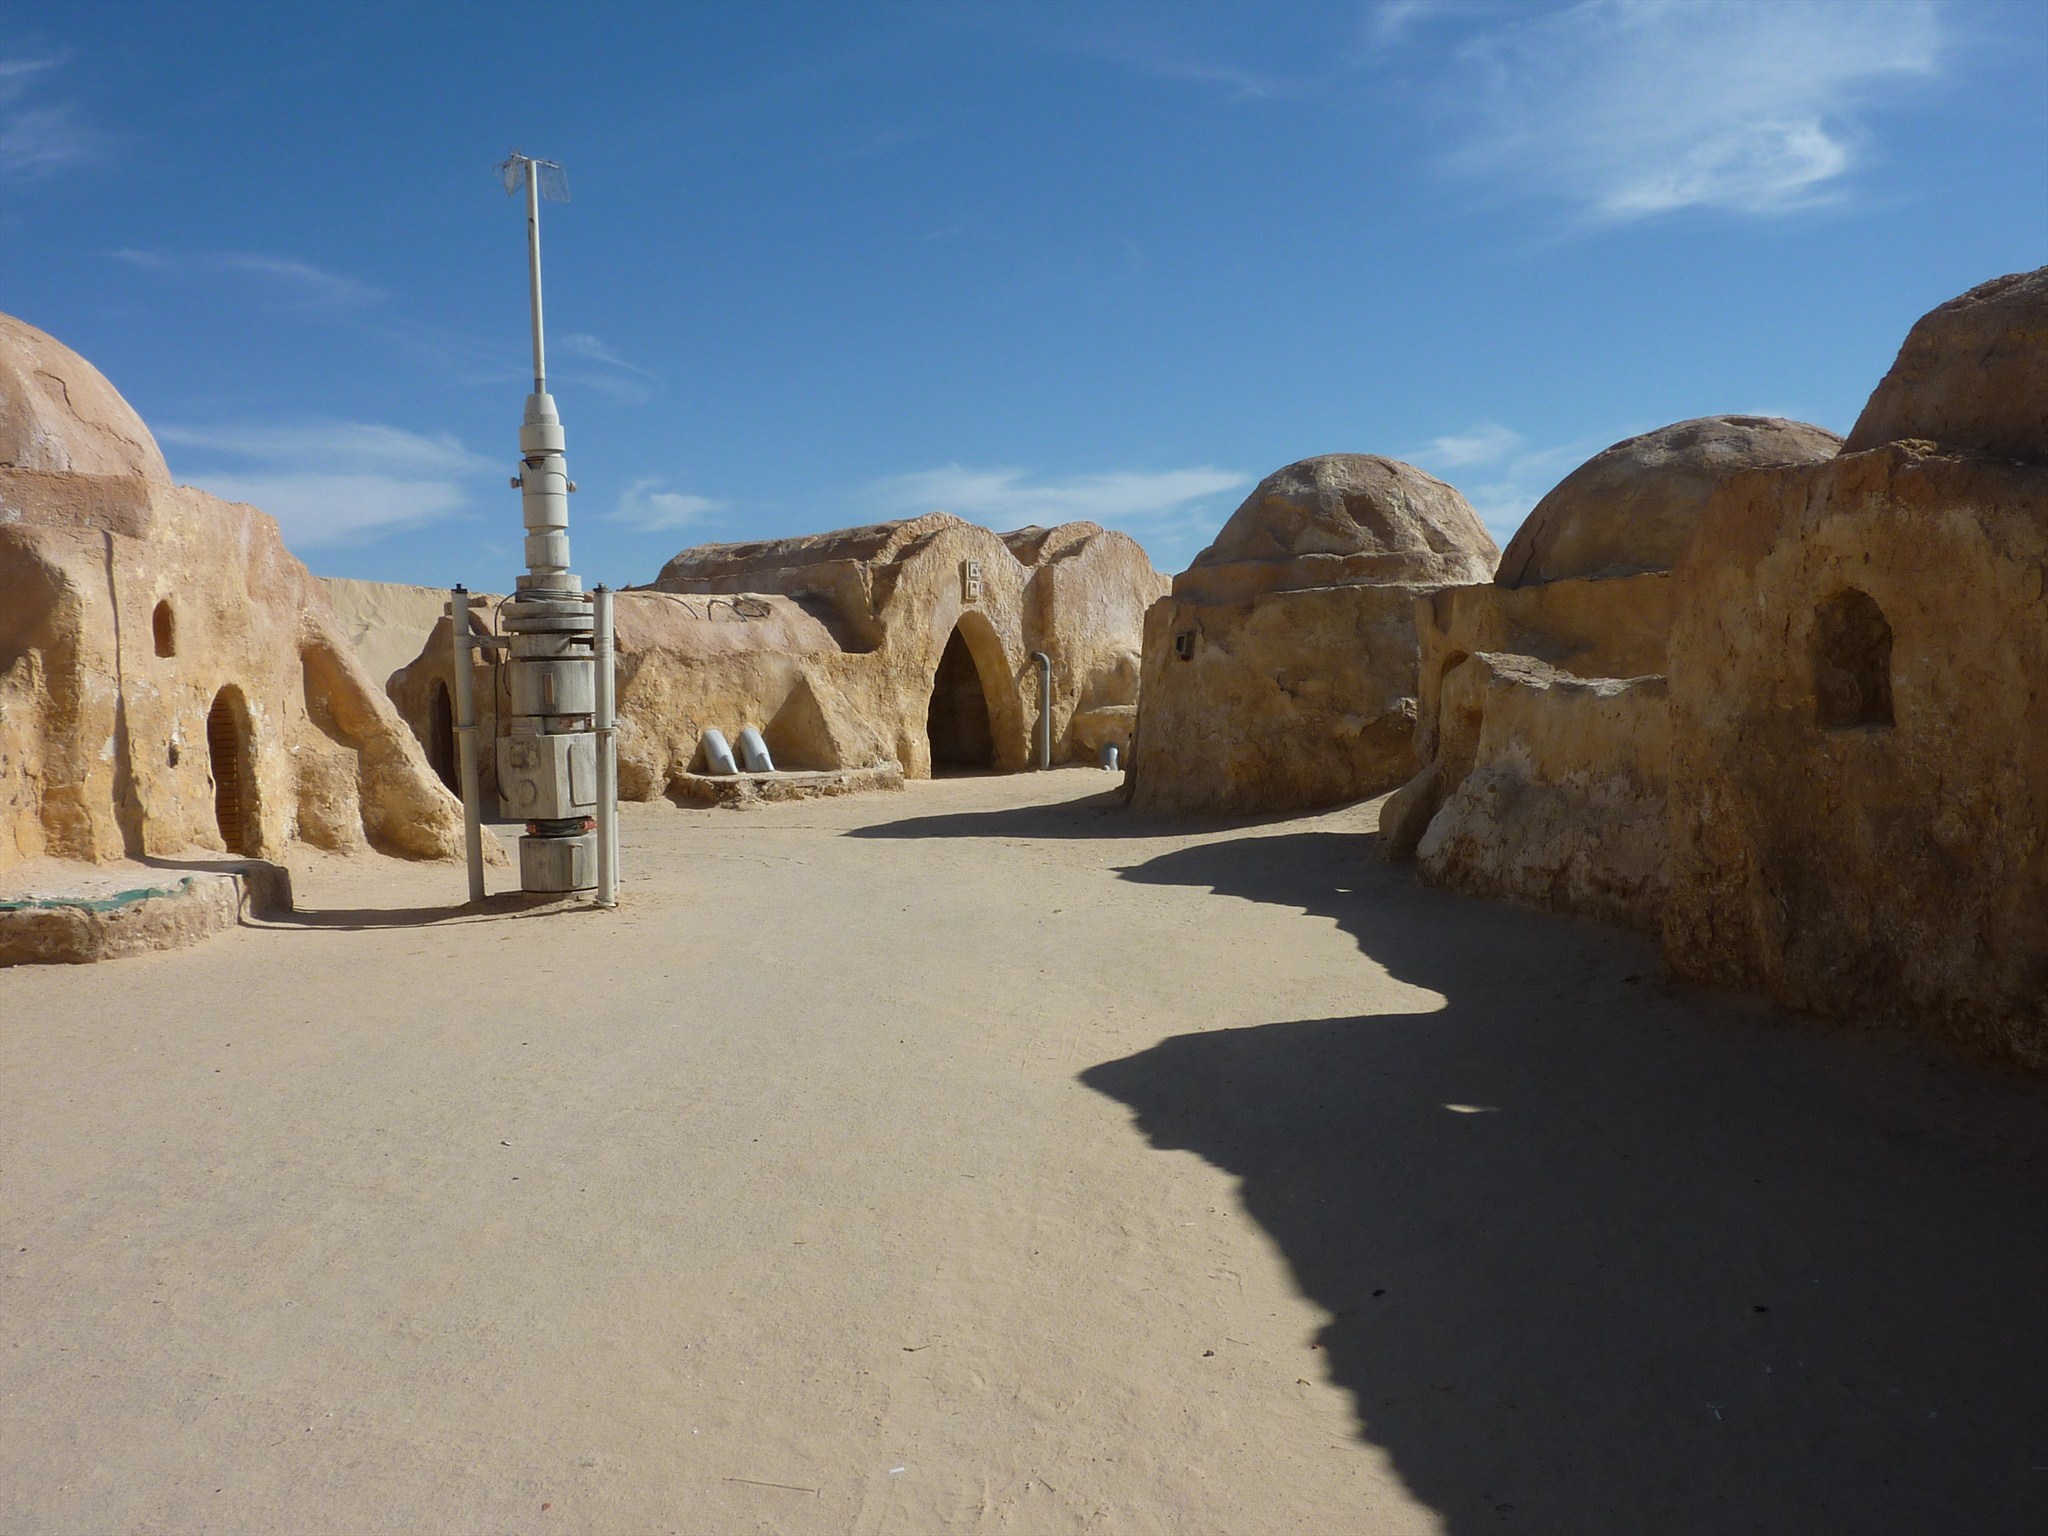 Another view of Mos Eisley. Photo by geocacher Kitou&Laulo44